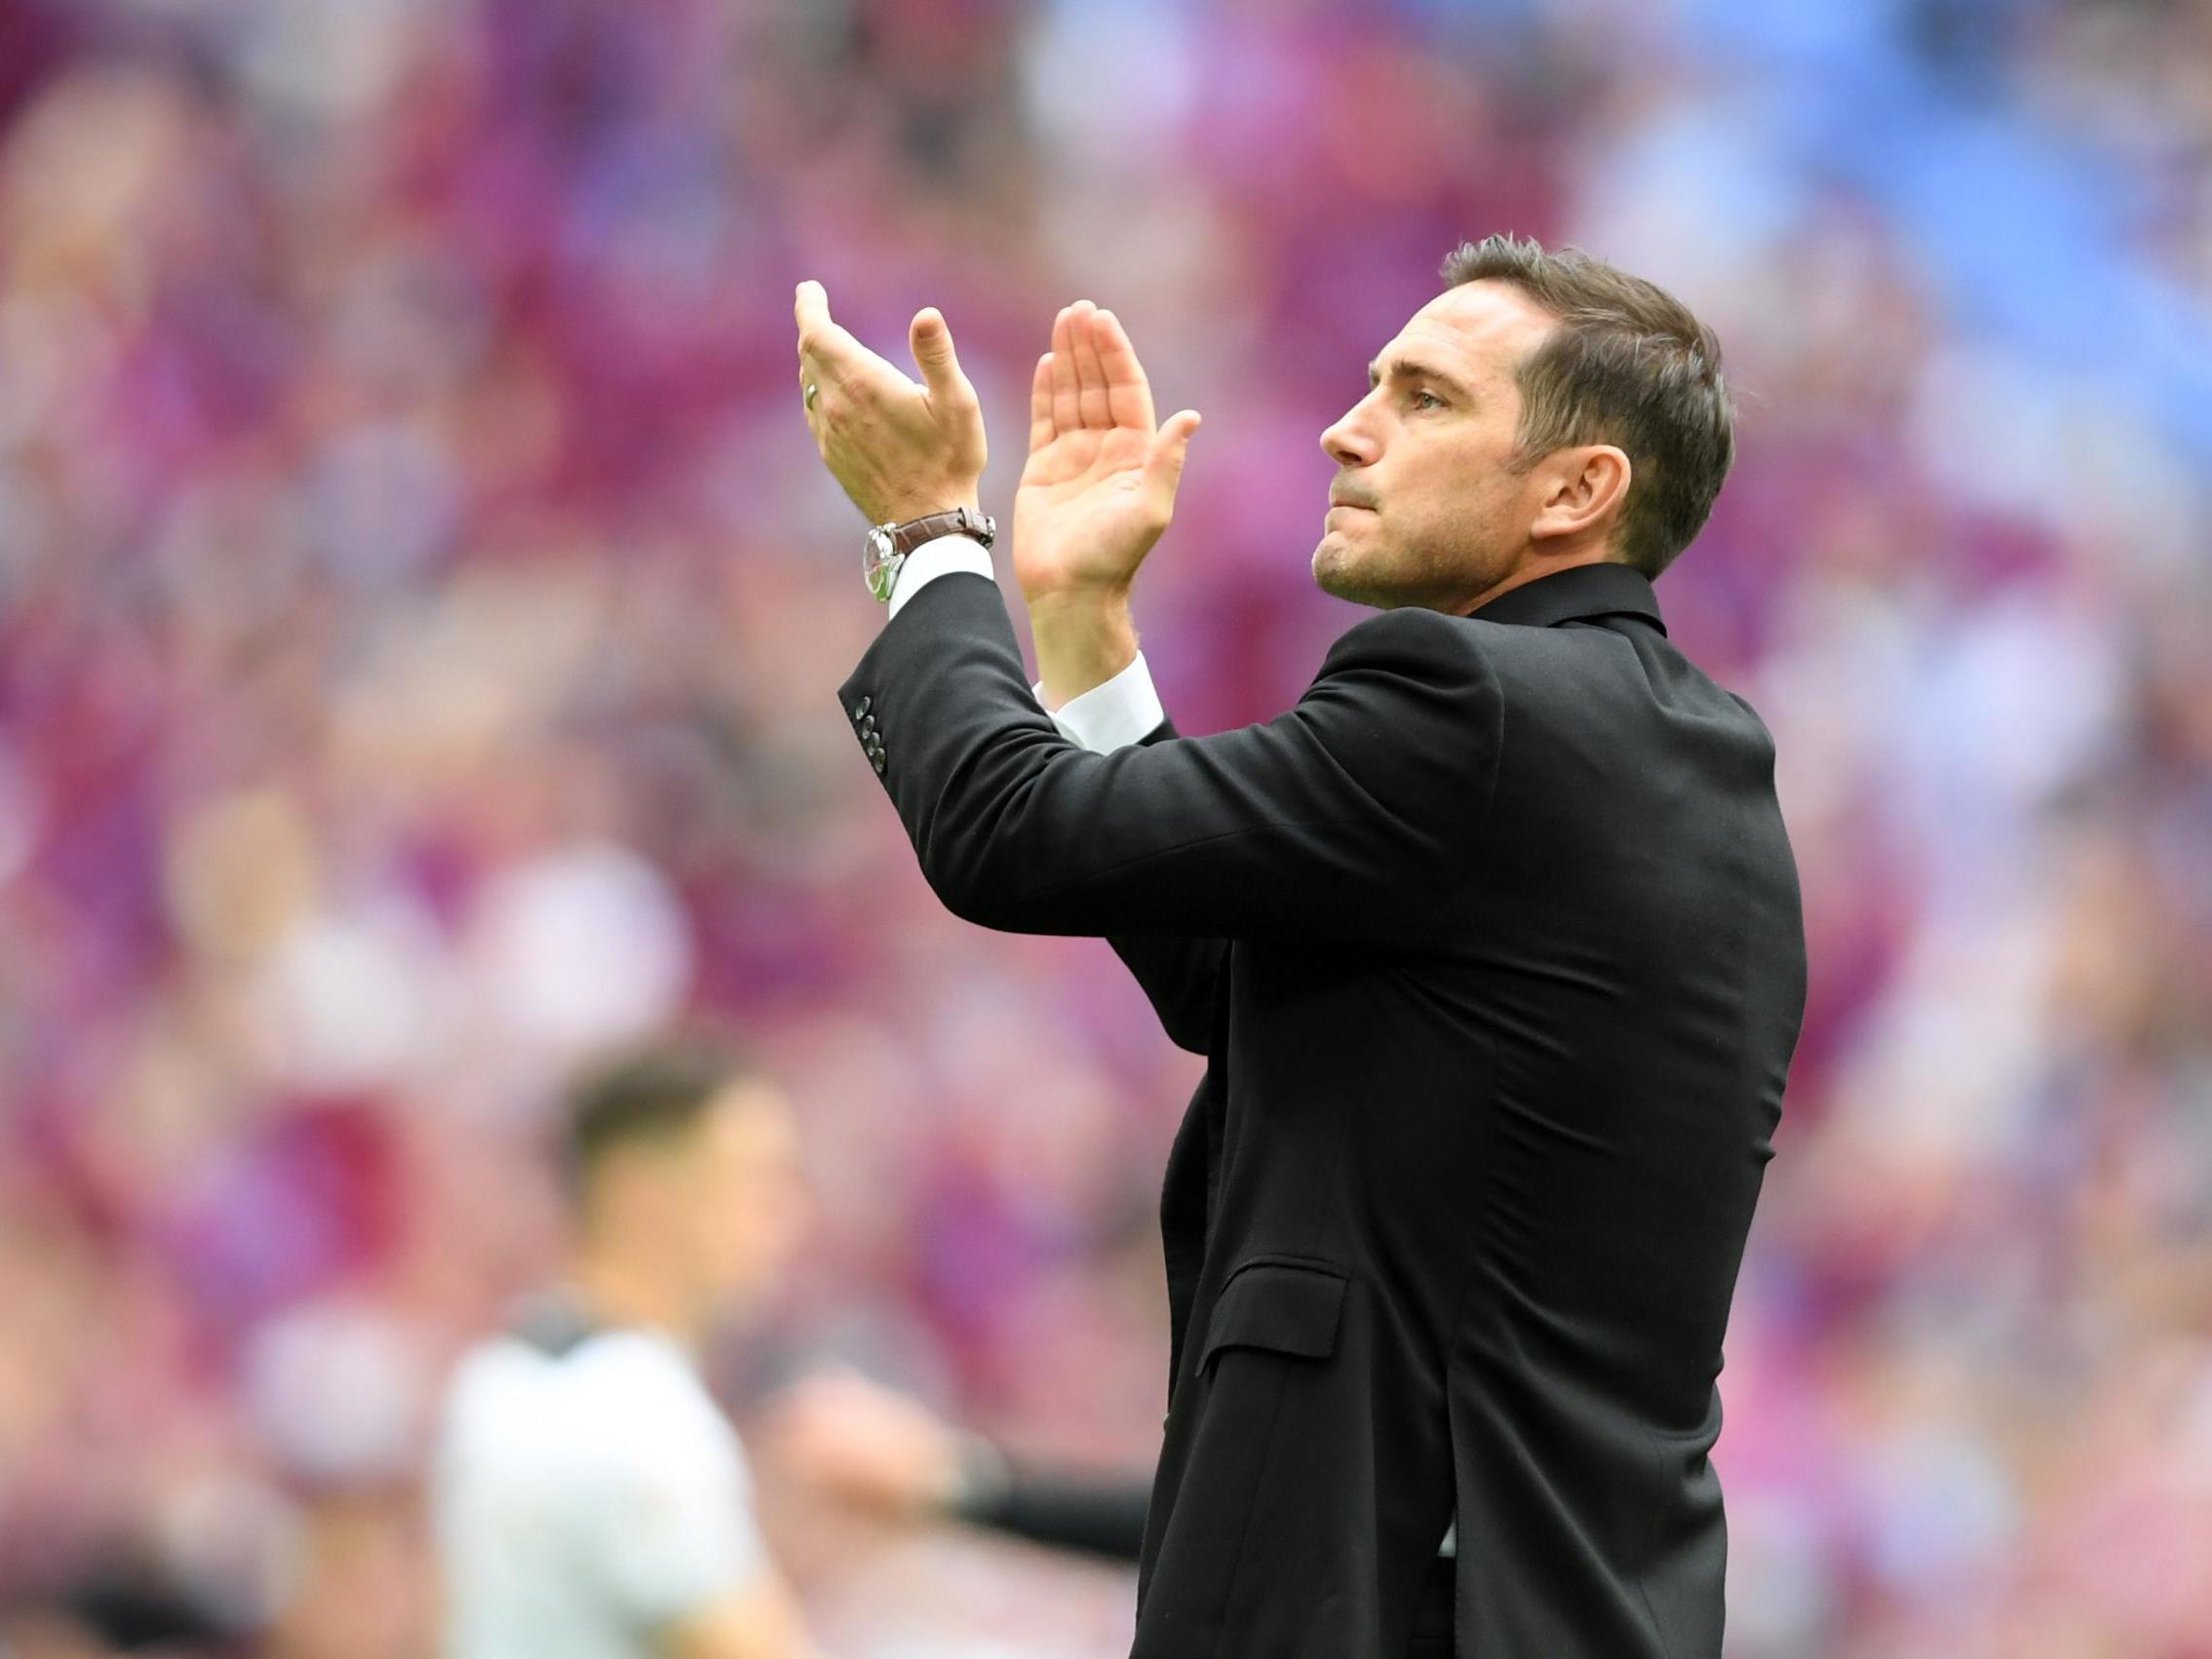 Frank Lampard's first year in management ended in defeat at Wembley